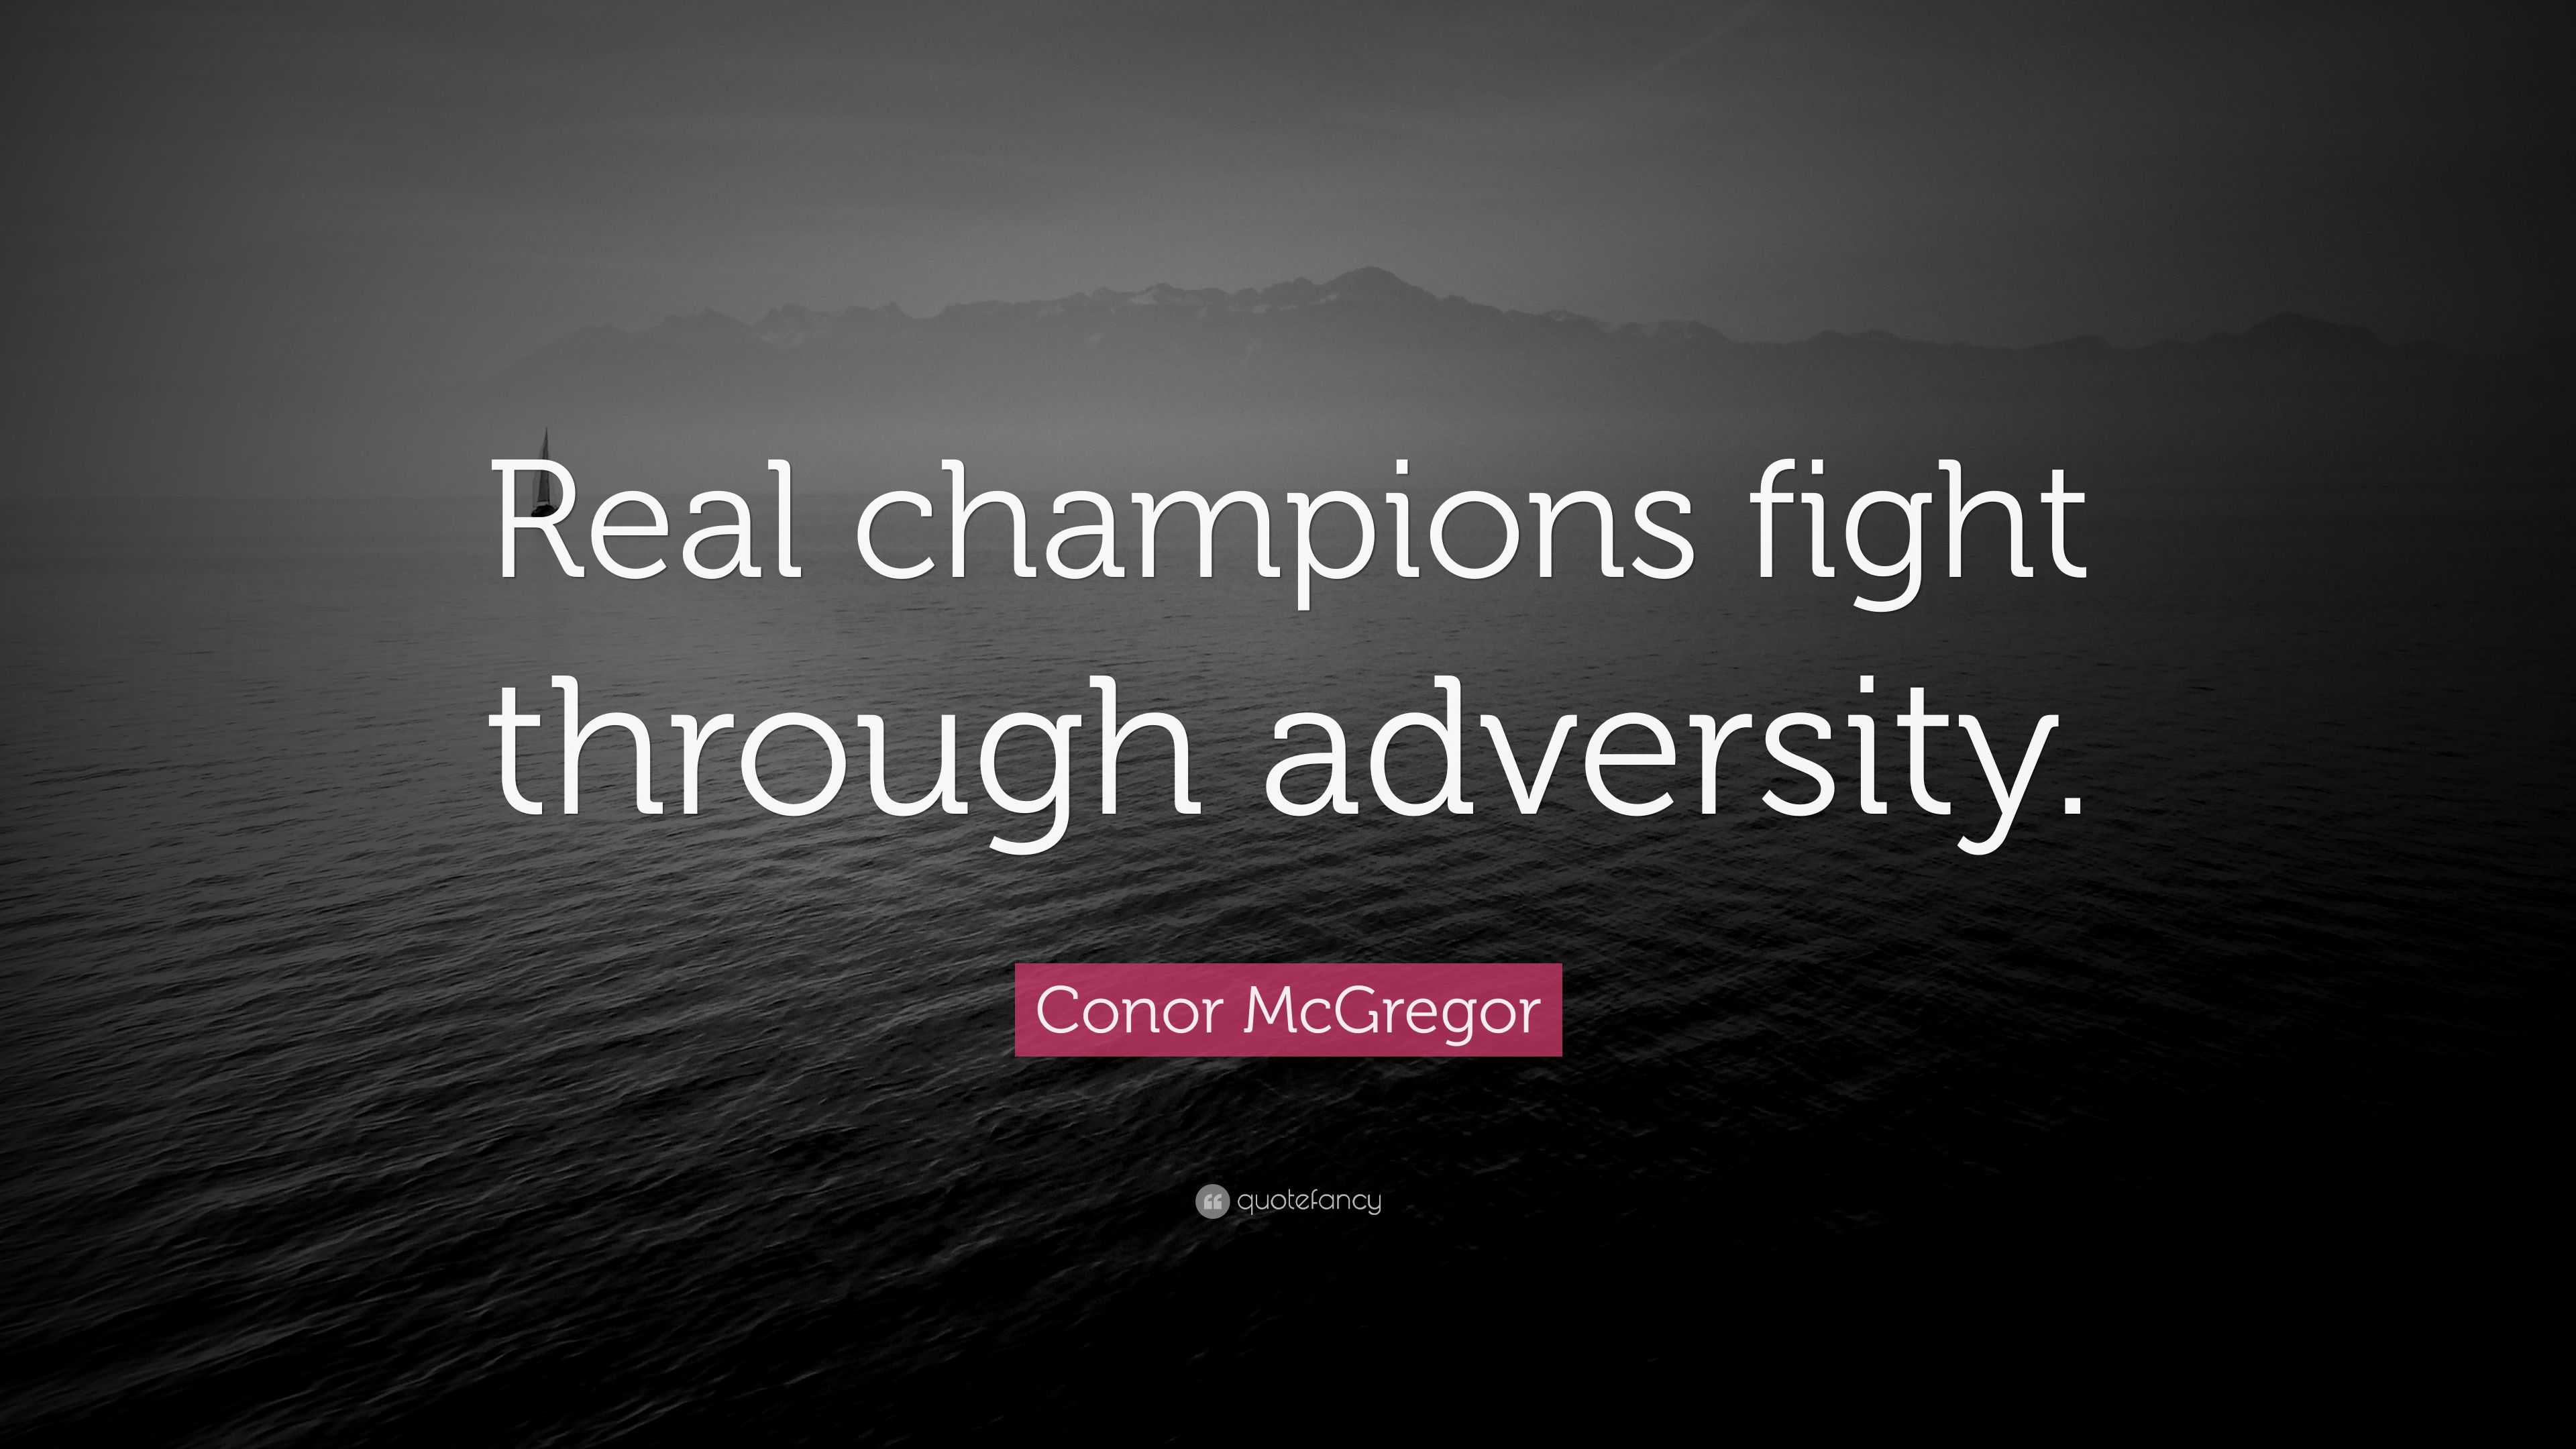 Fighter Quotes Inspirational : 35 Motivational Conor McGregor Quotes On